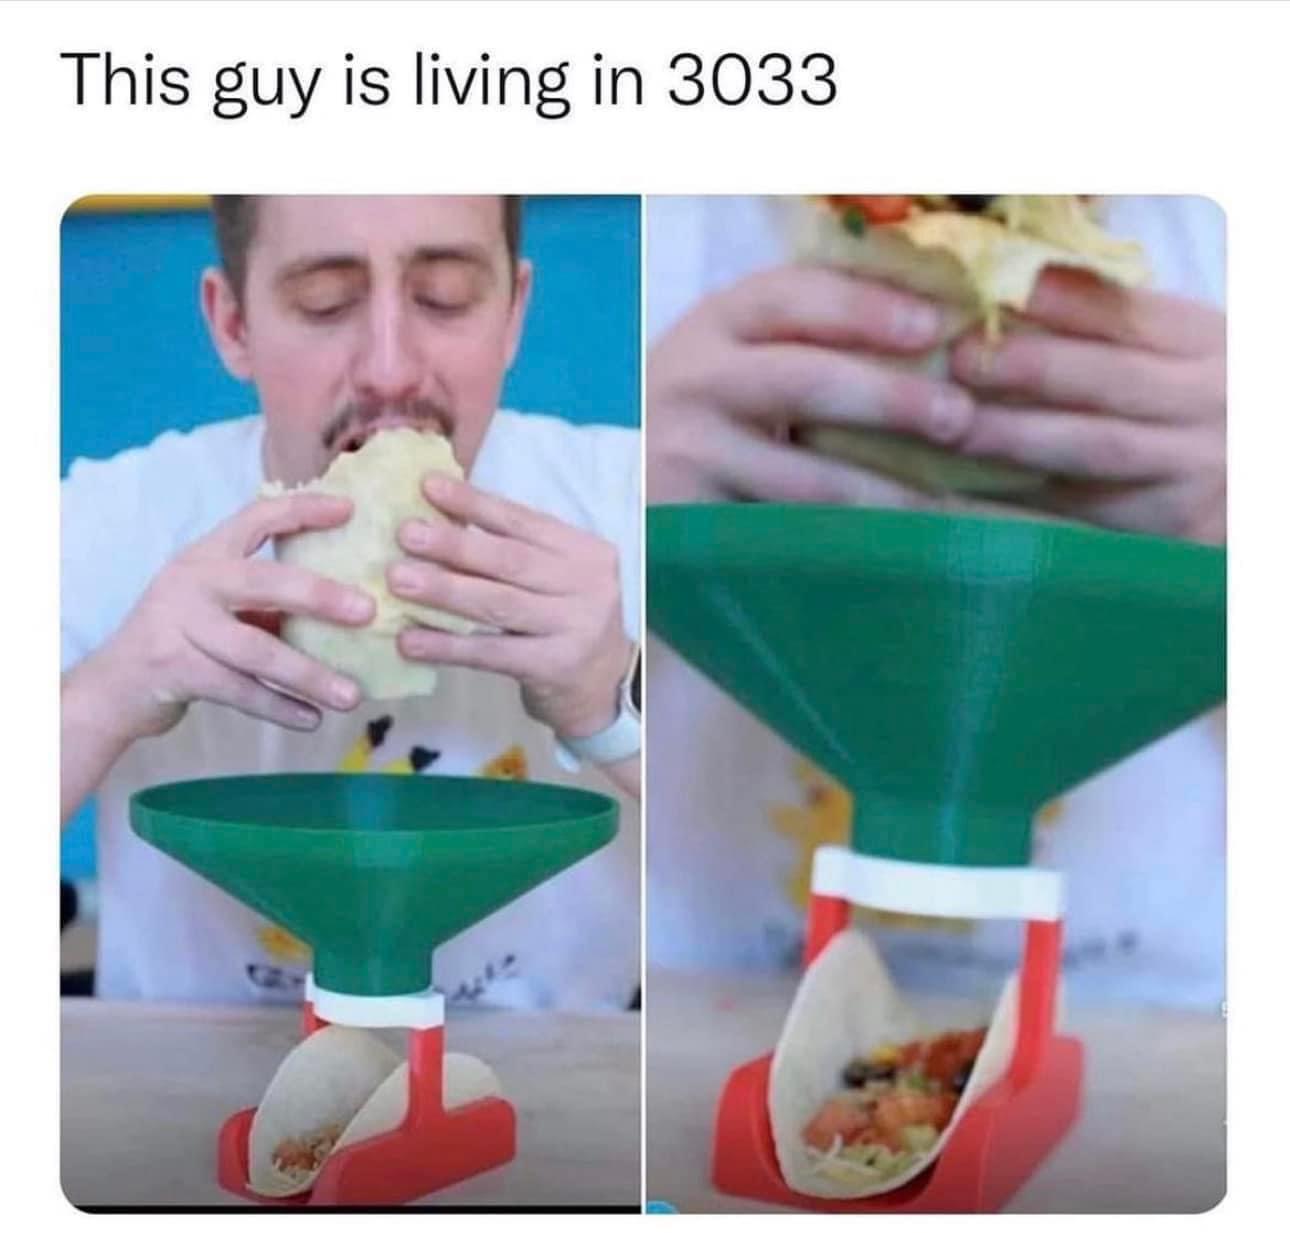 funny memes - useless inventions meme - This guy is living in 3033